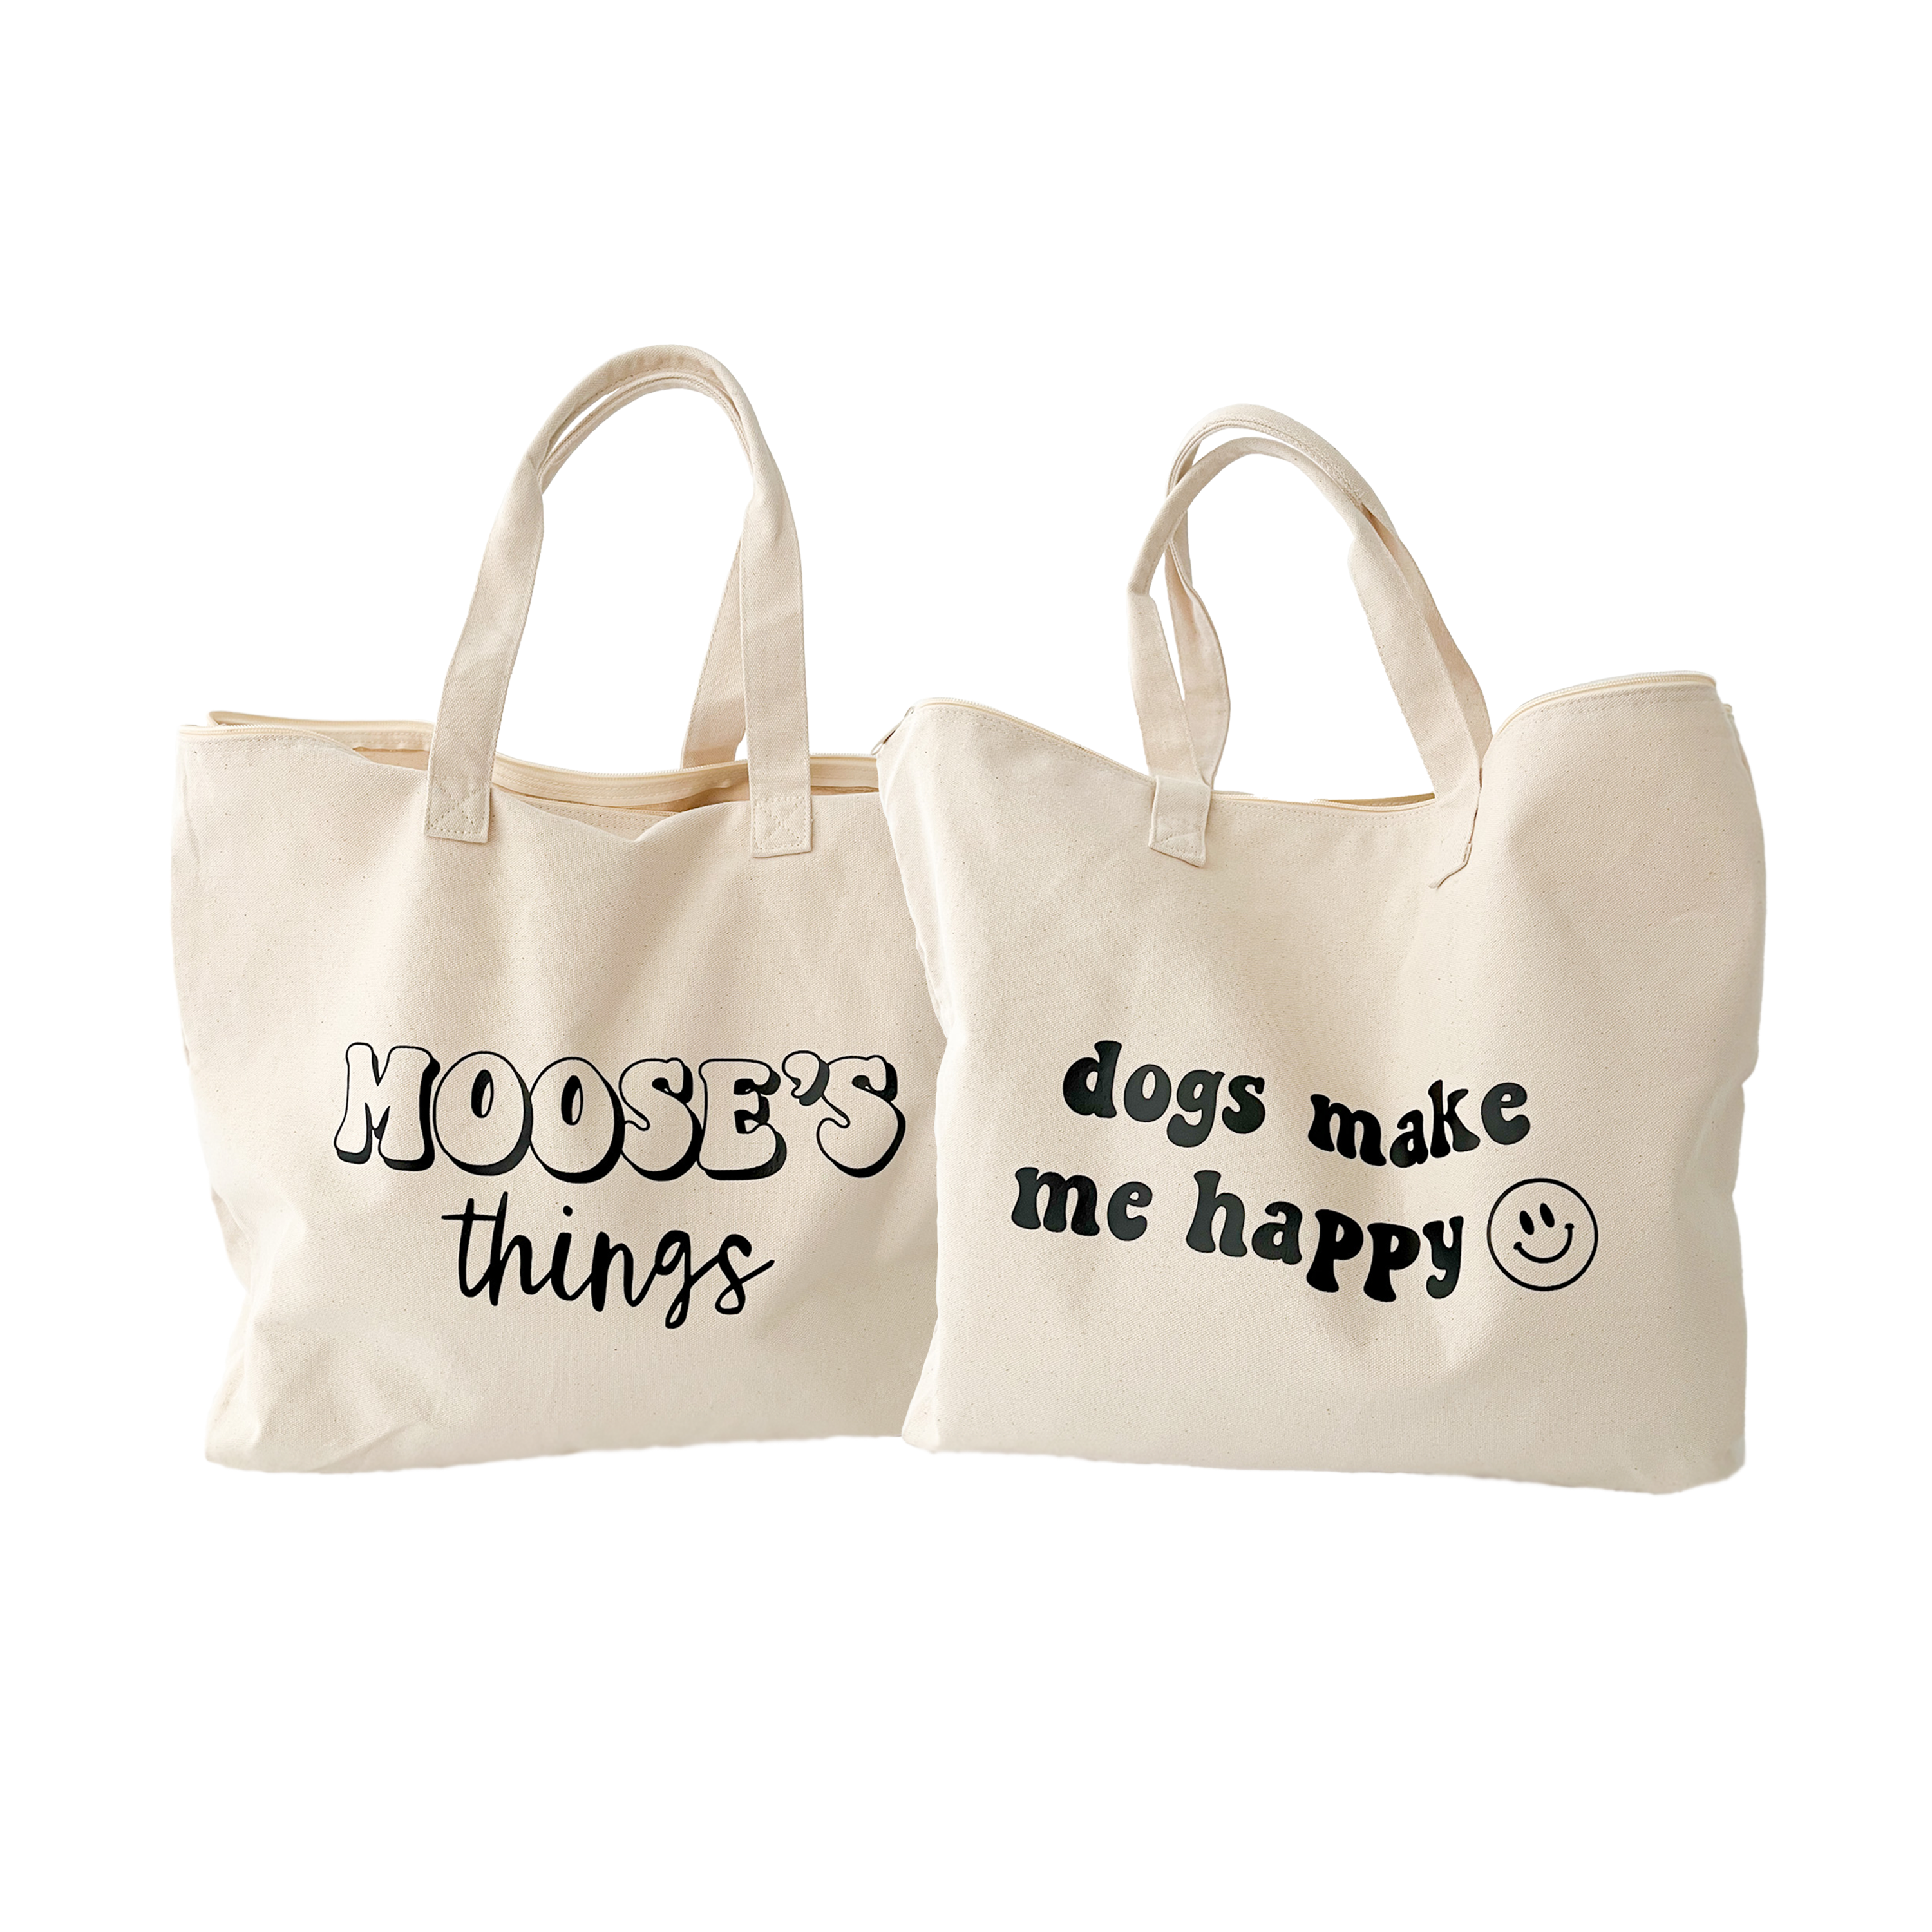 Tote-ally Awesome Bags by Amy D'Anna